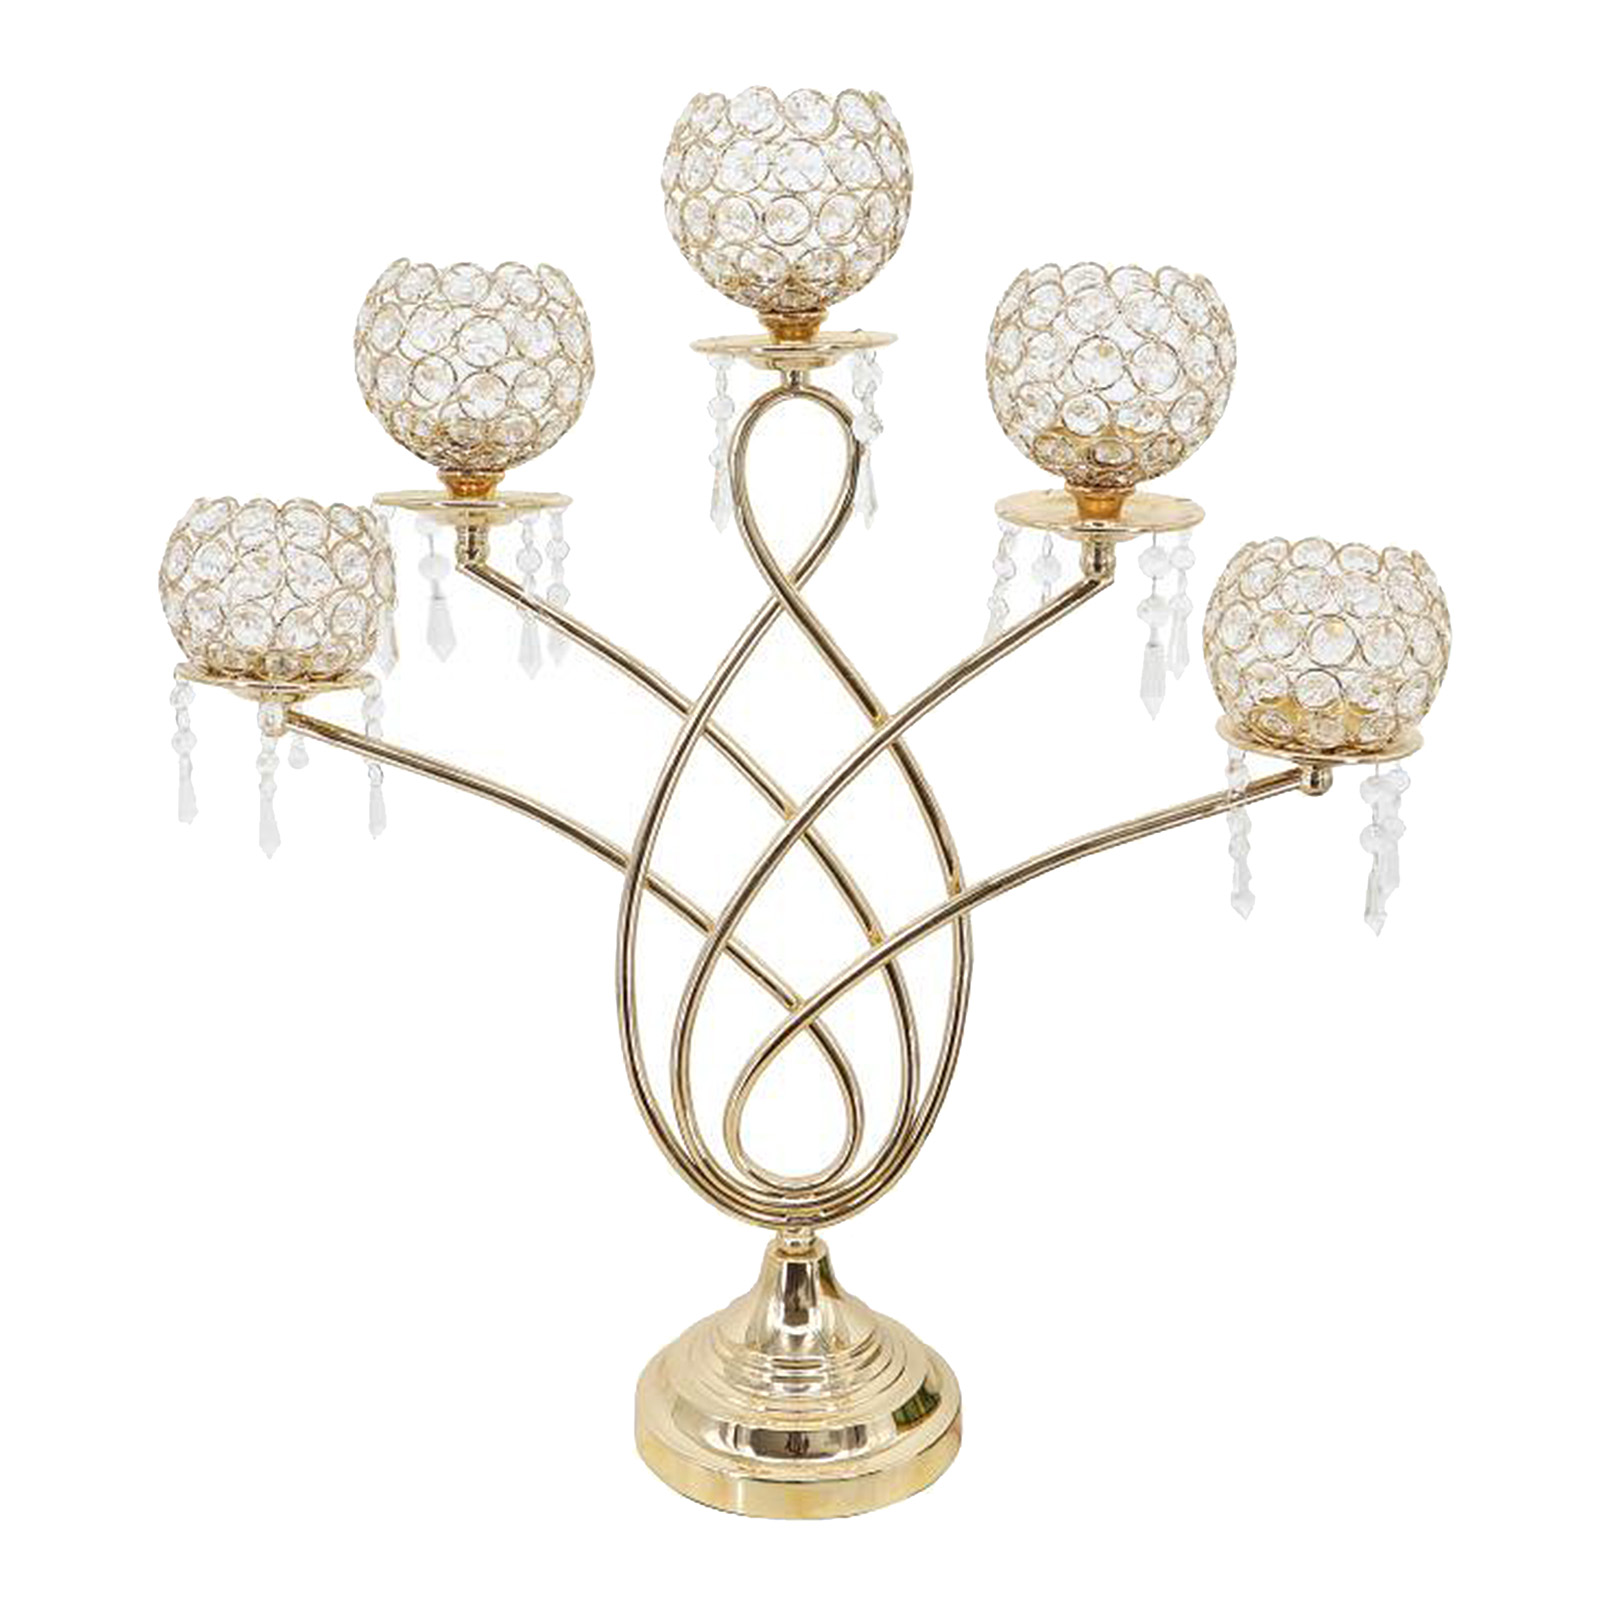 5 Arms Crystal Tabletop Candle Holder Christmas Style Tea Light Candle Holder